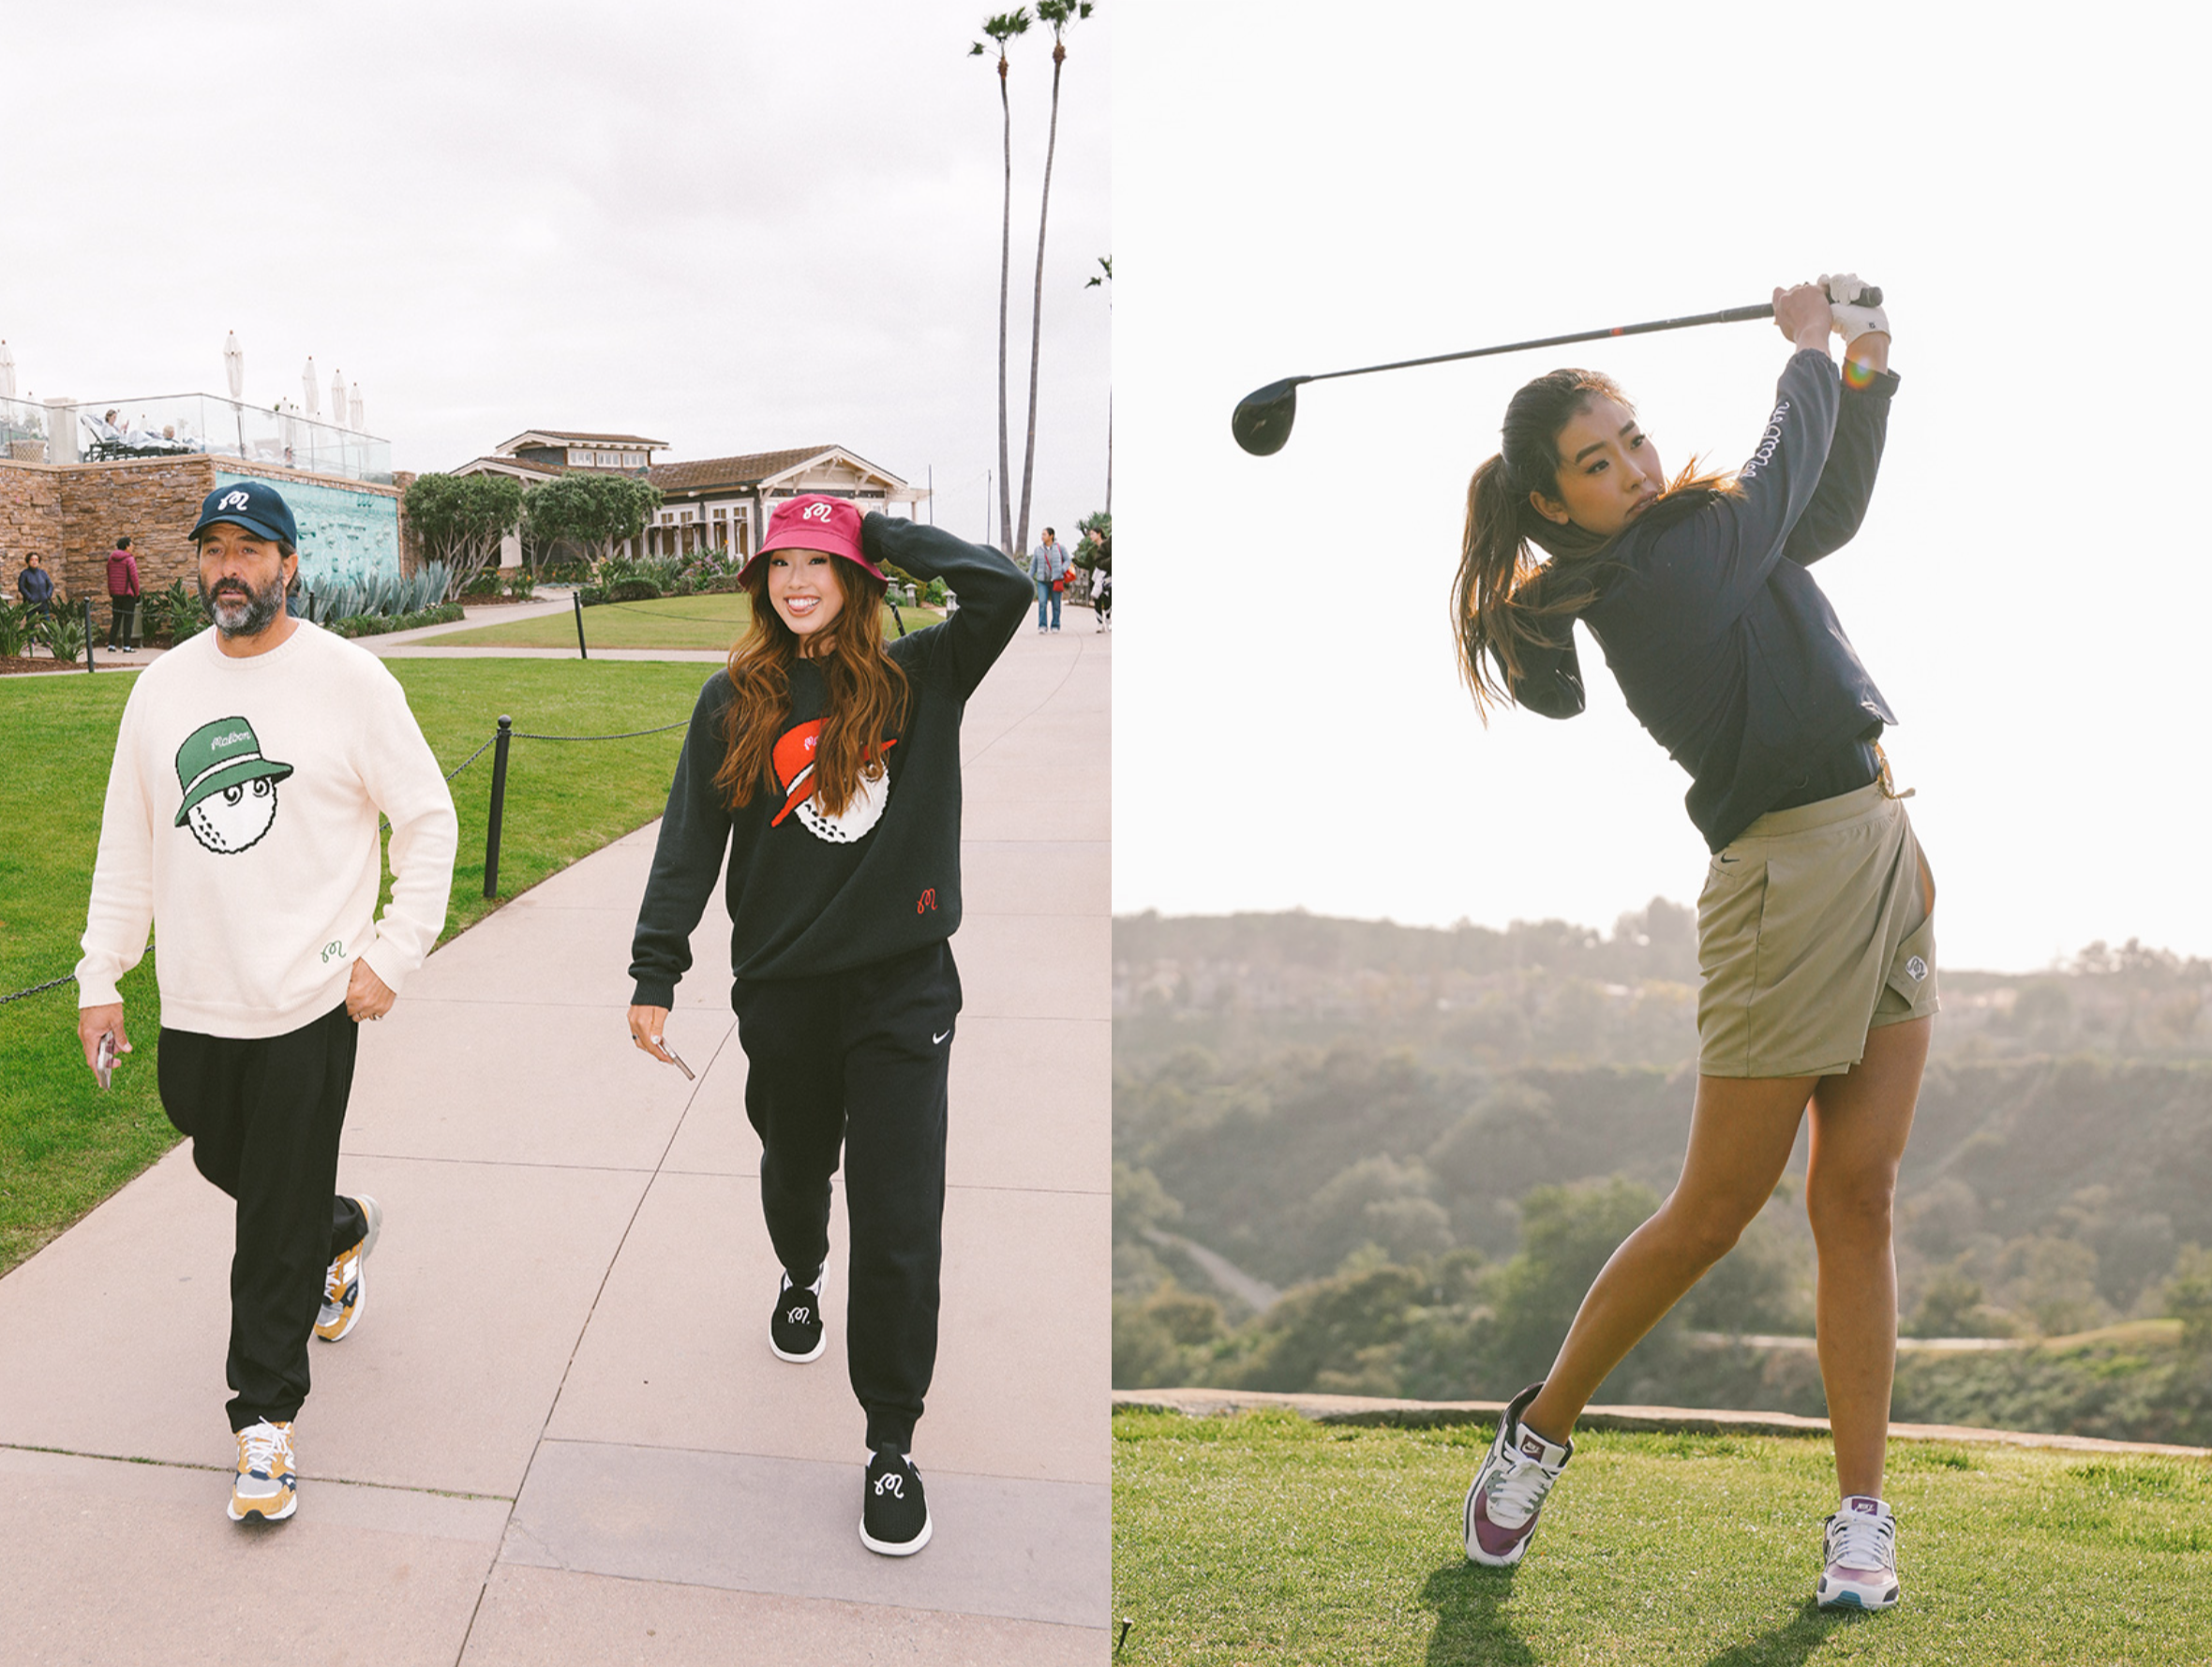 Women's golf apparel industry growing, but not without challenges